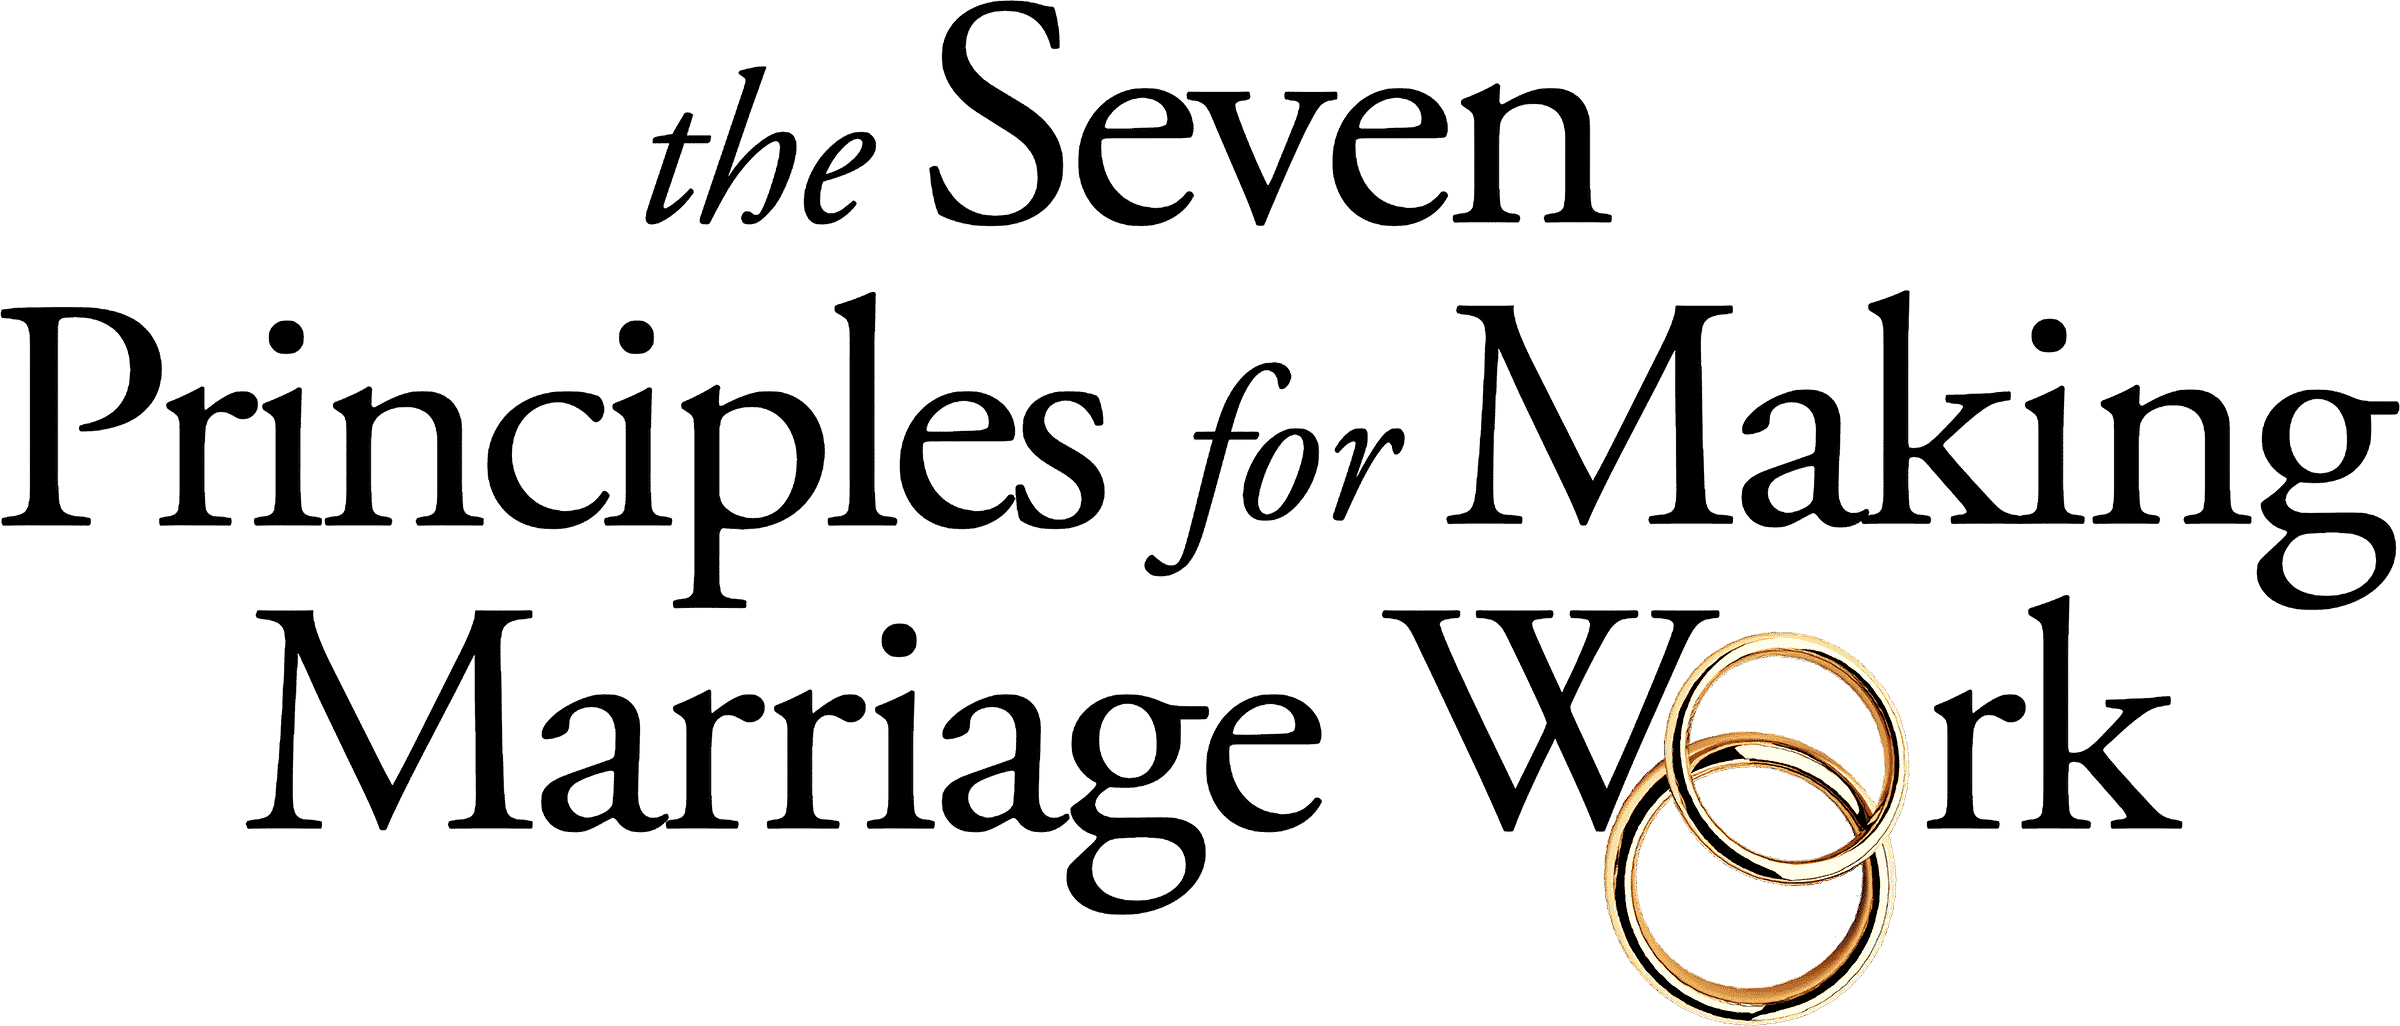 The Seven Principles for Making Marriage Work - Image - On Your Mind Counselling